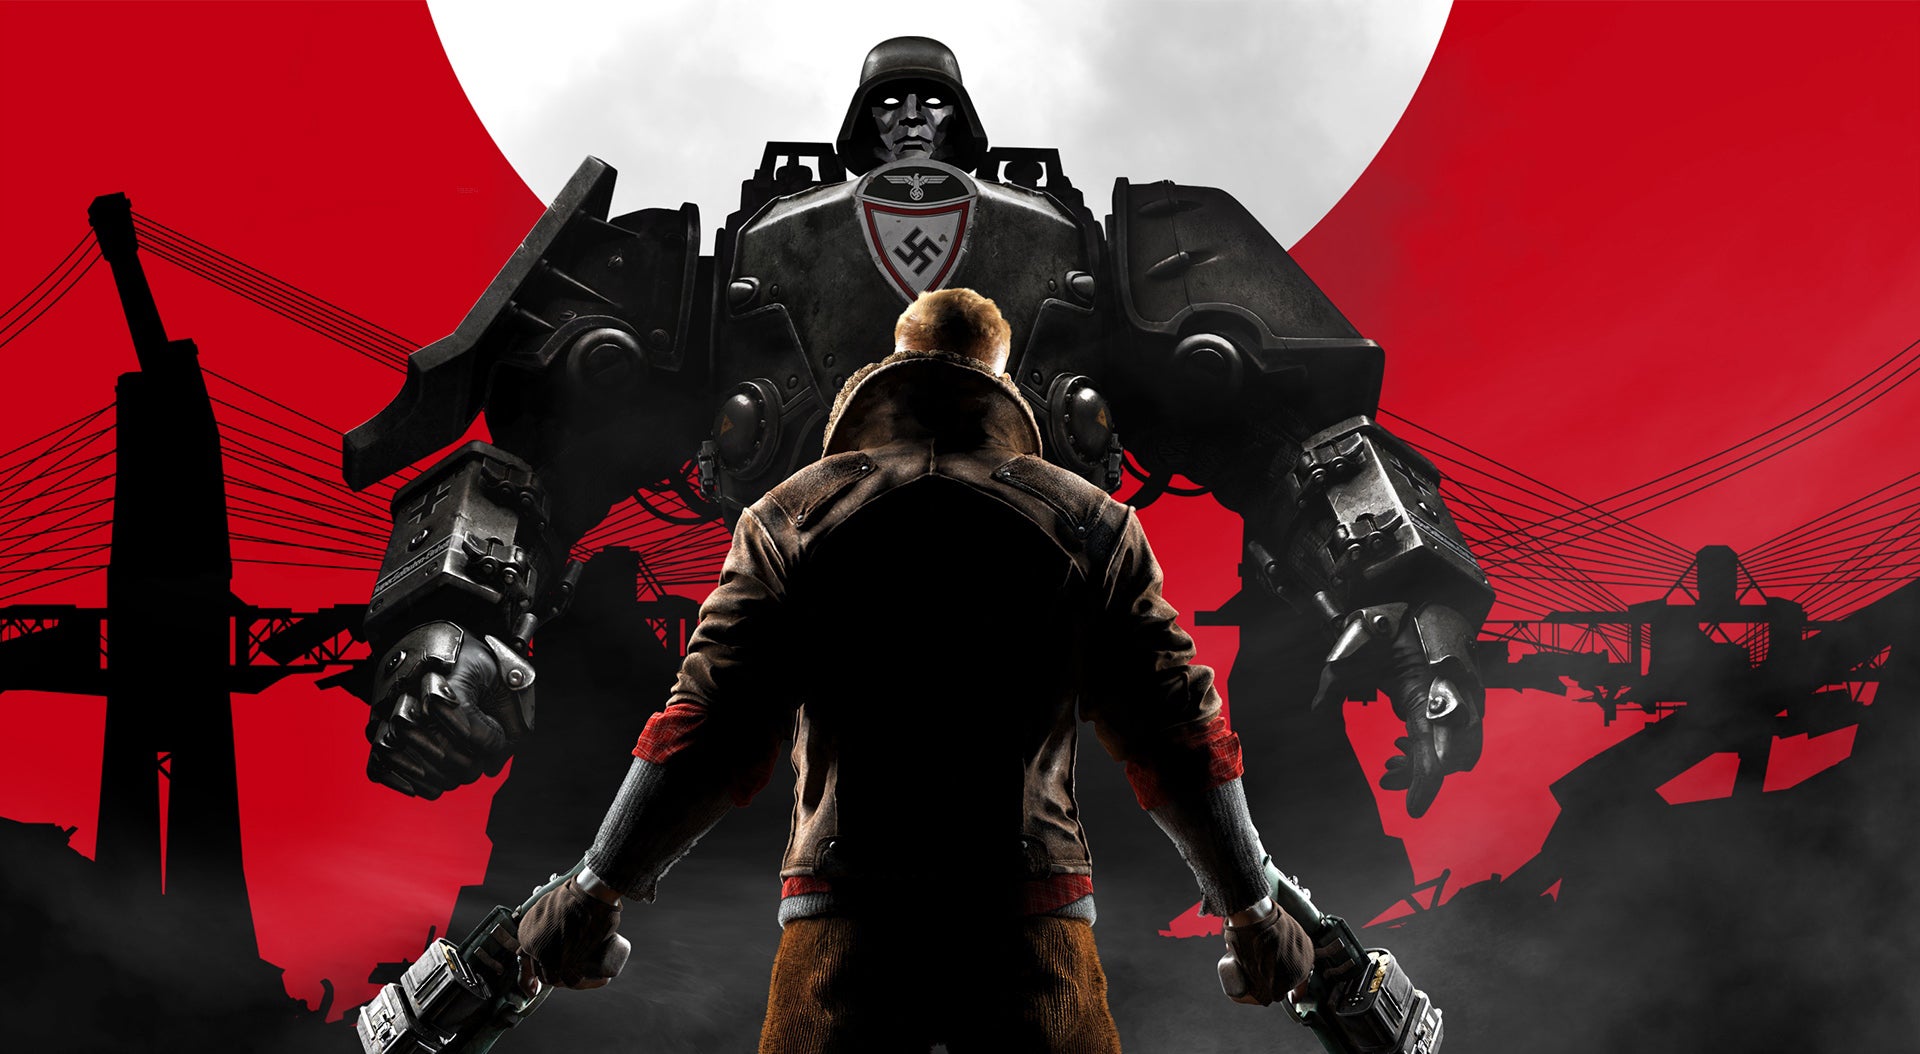 Image for Wolfenstein 2: The New Colossus is now available on the Switch